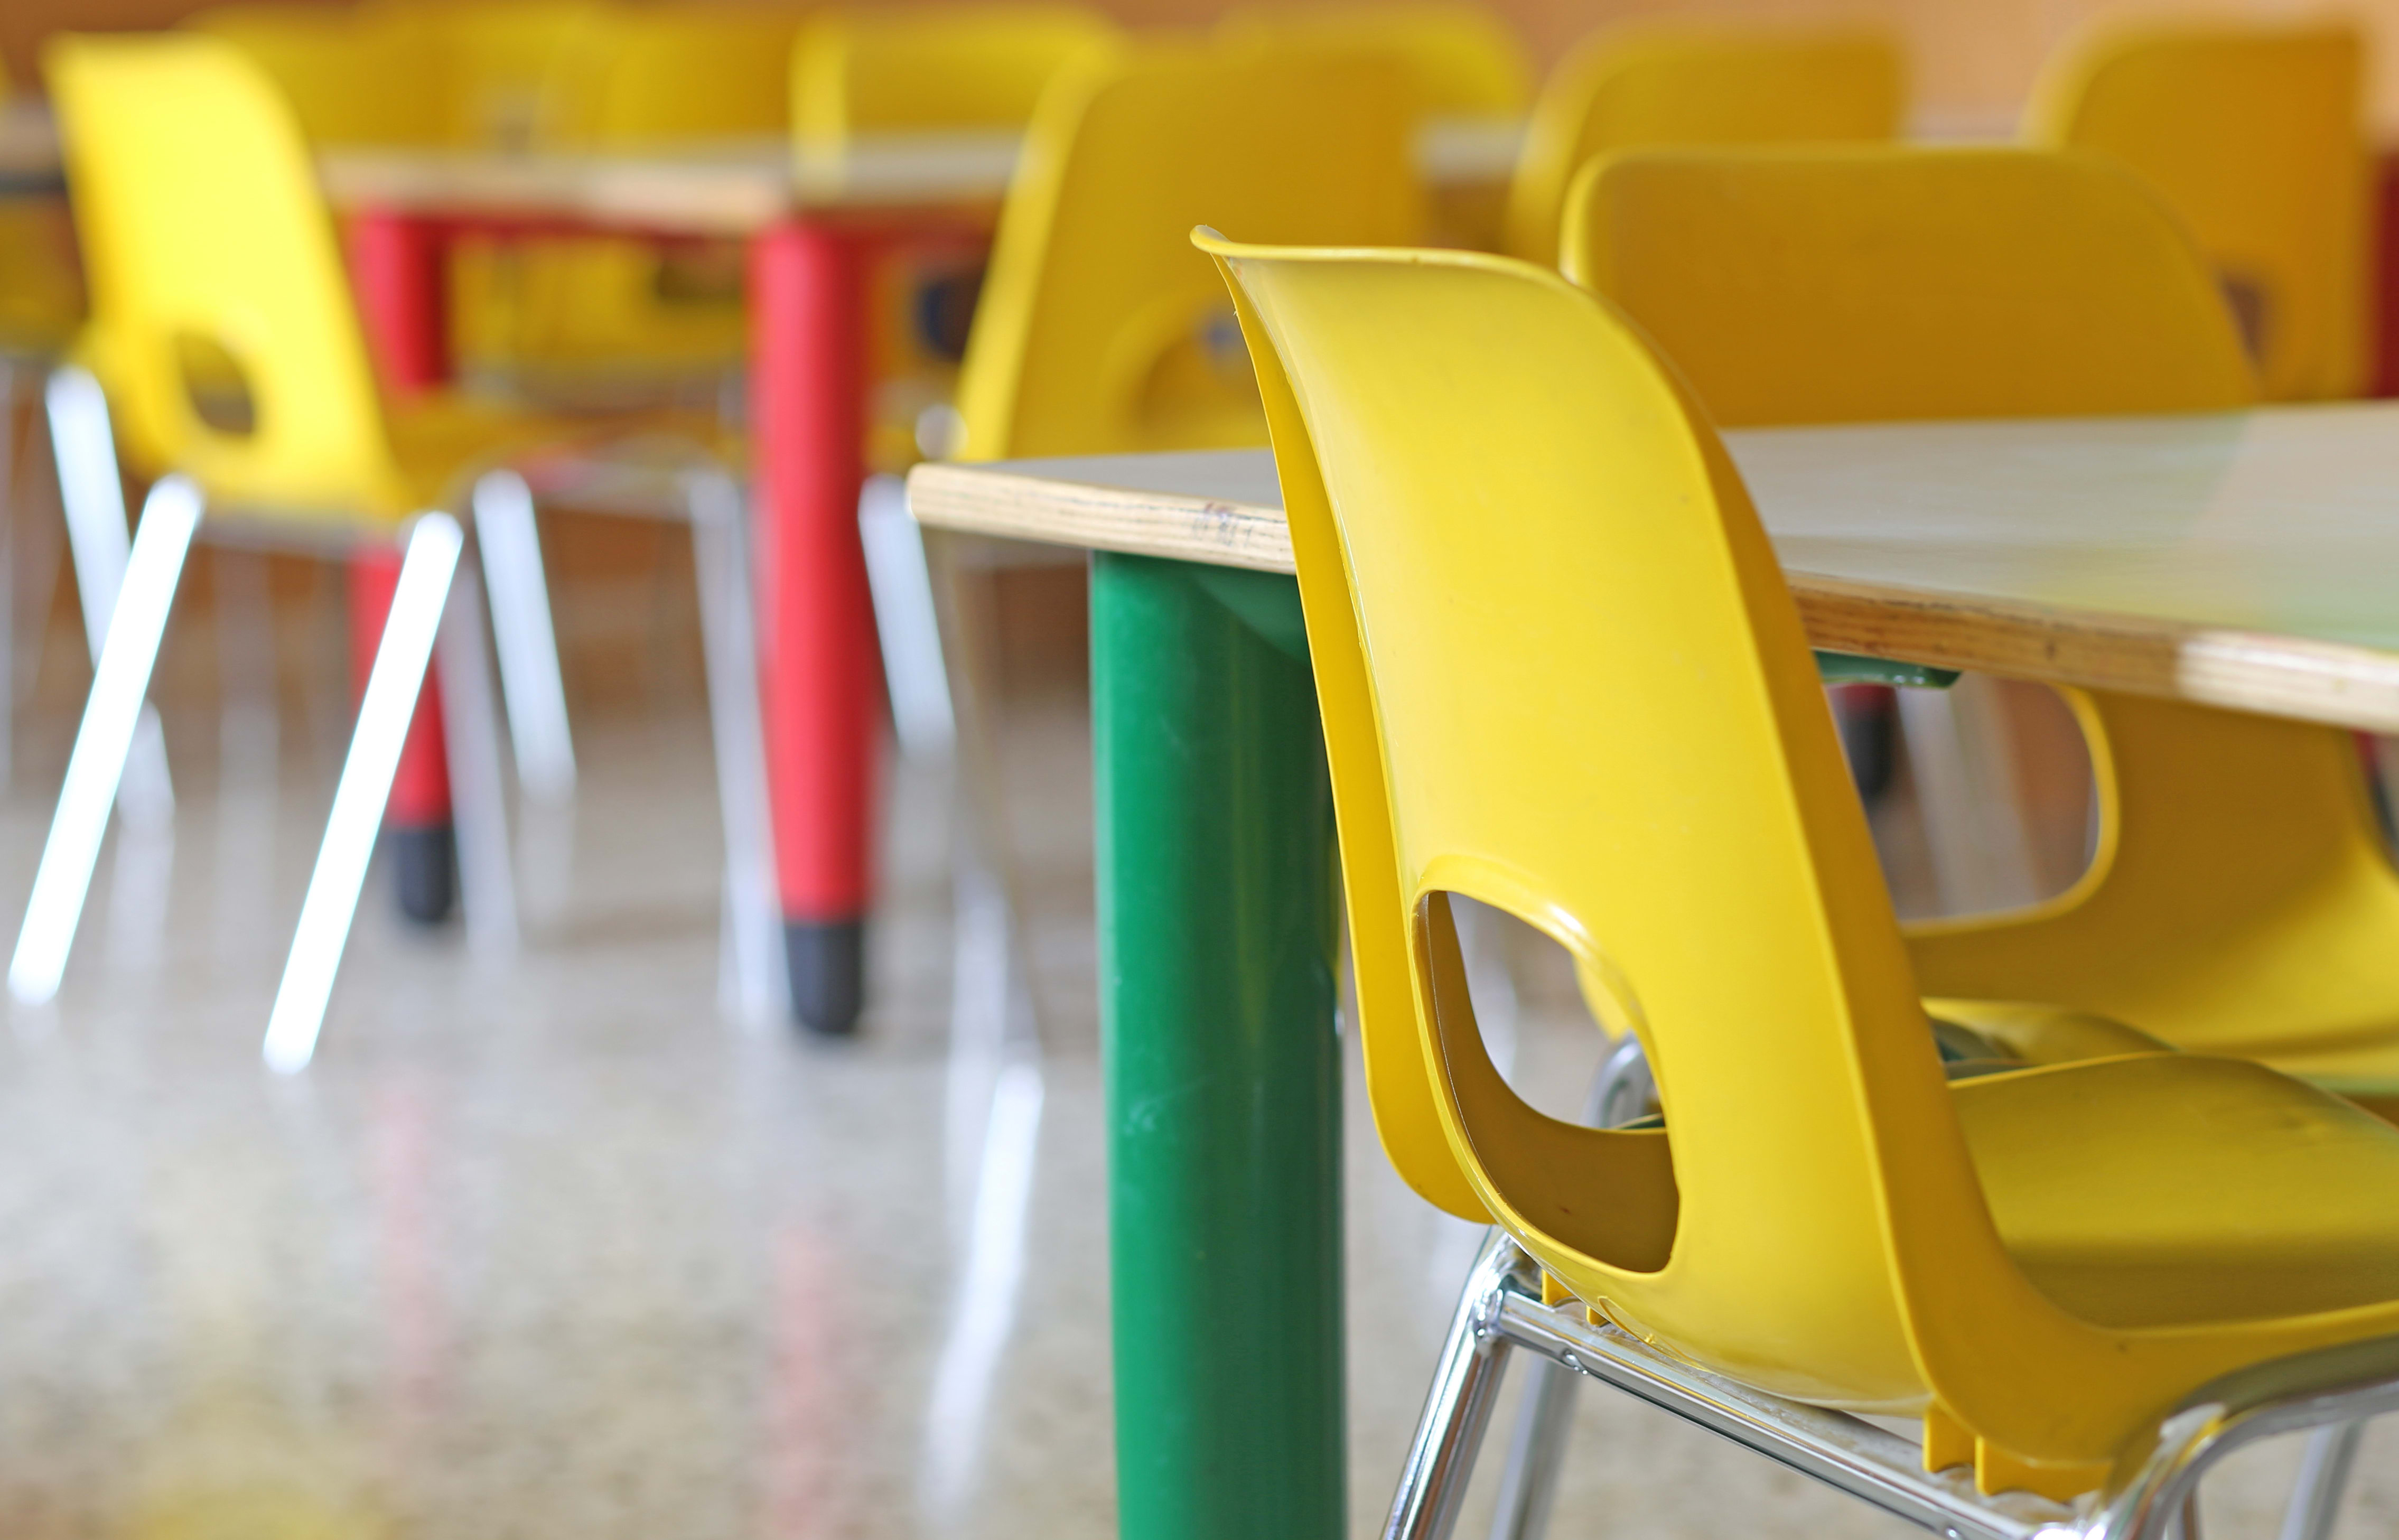 A file photo shows bright yellow chairs in a kindergarten or pre-school.